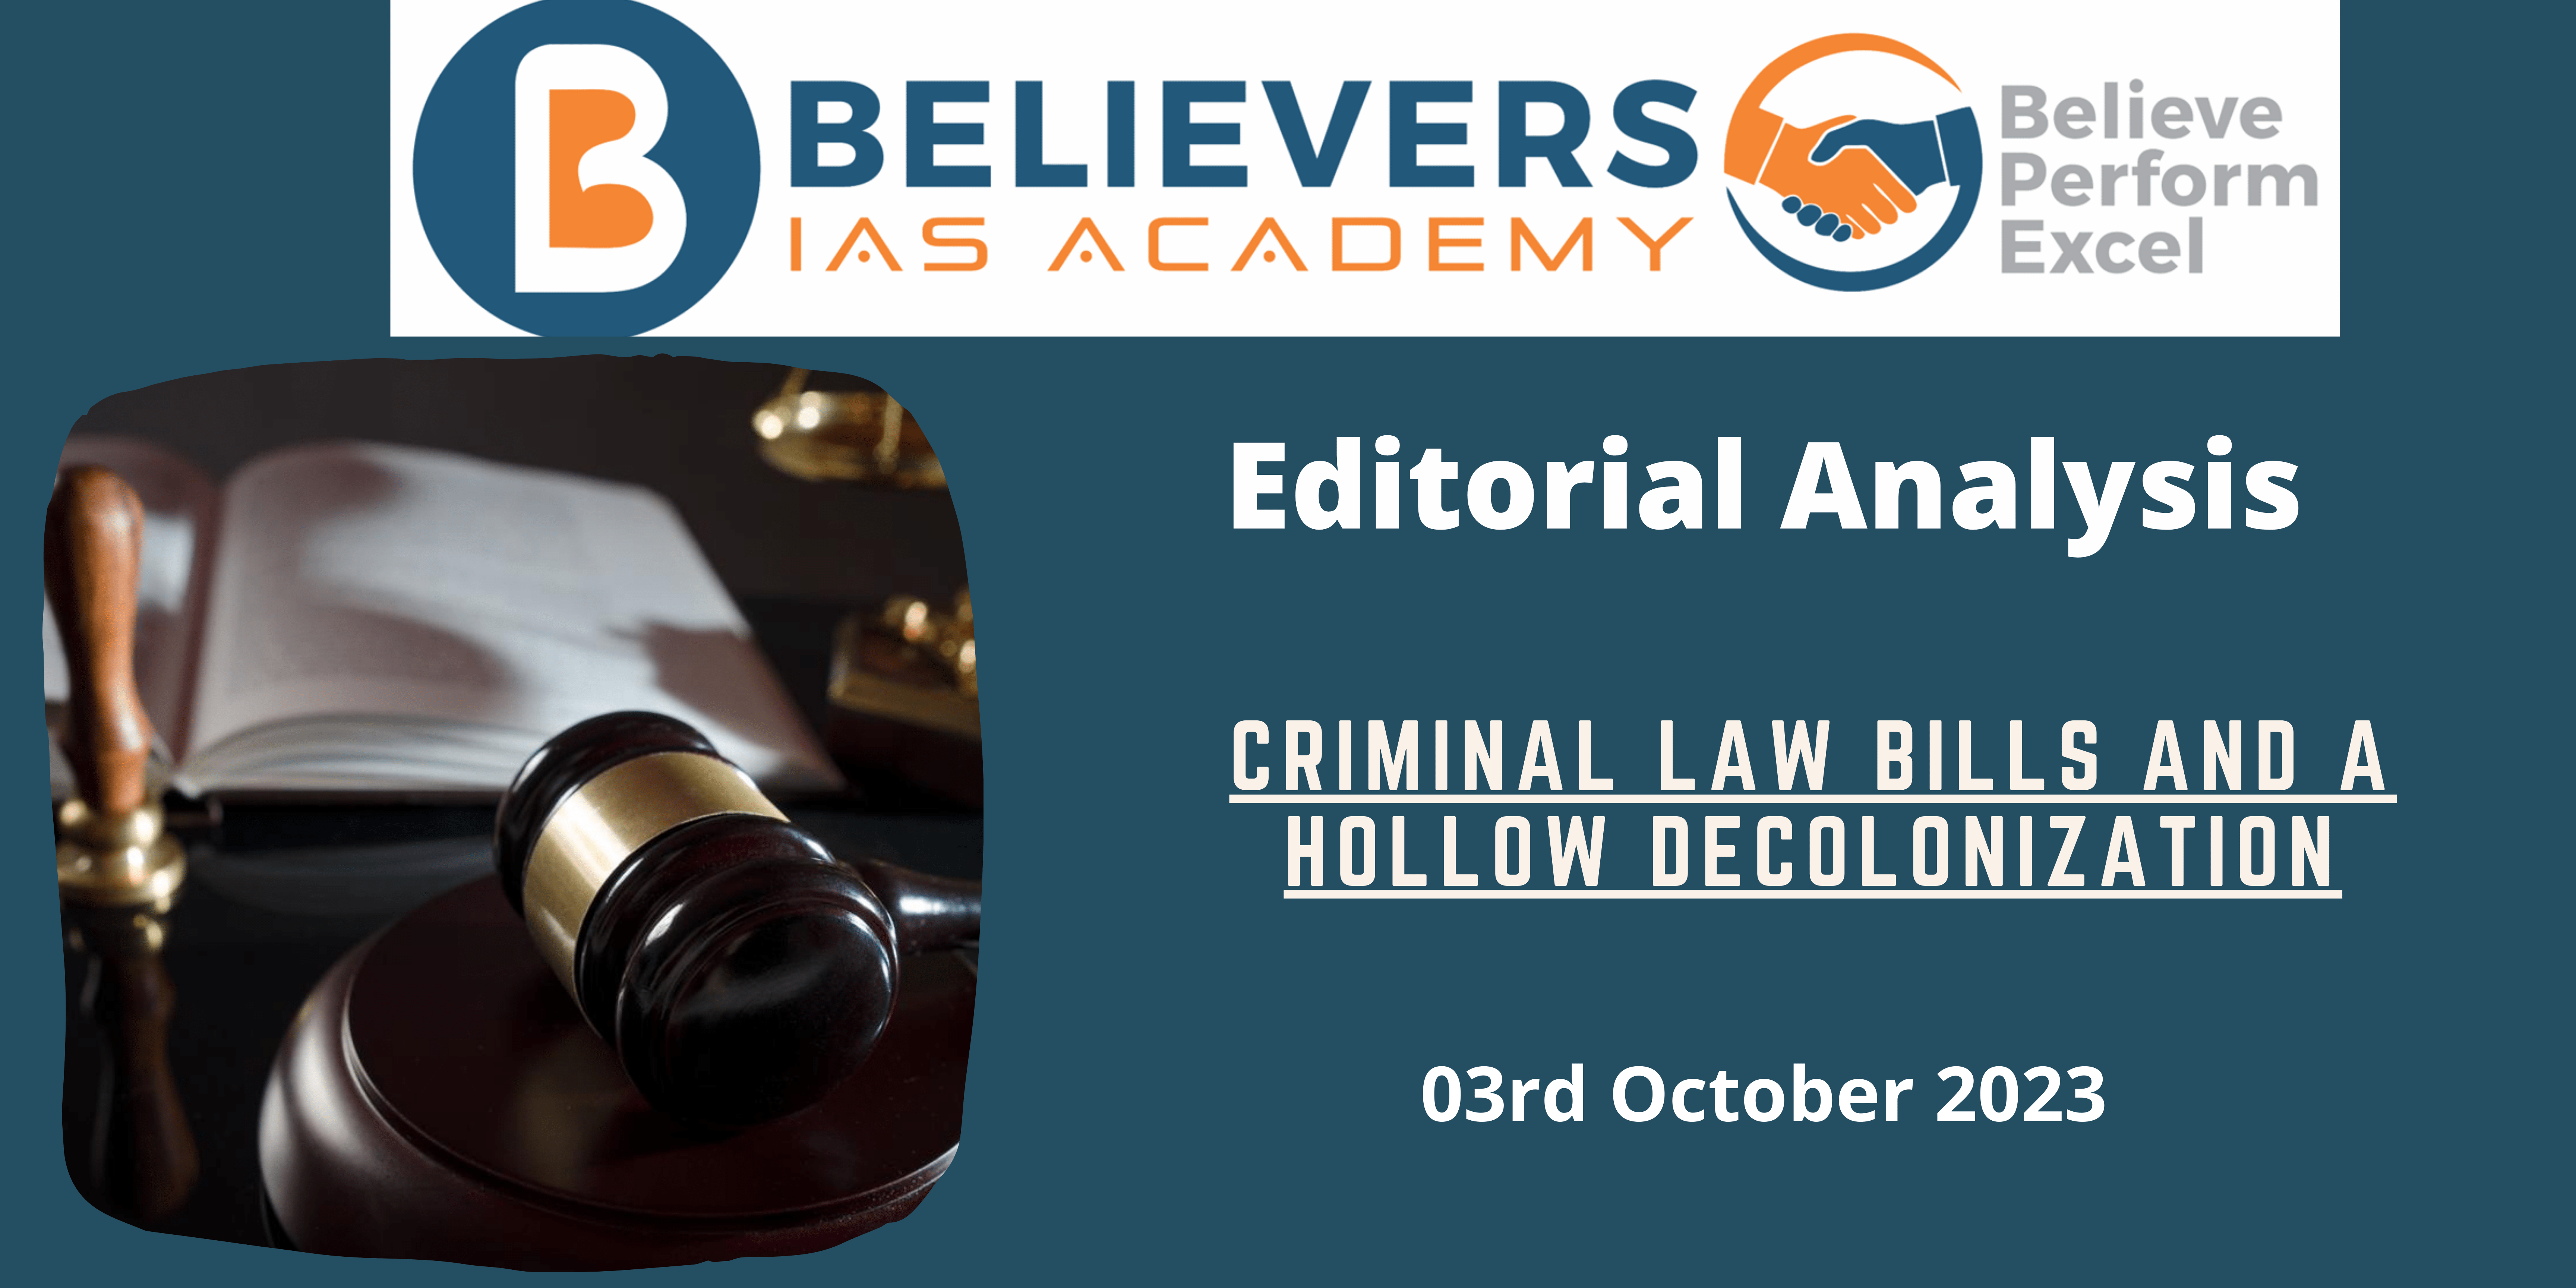 Criminal law Bills and a hollow decolonization